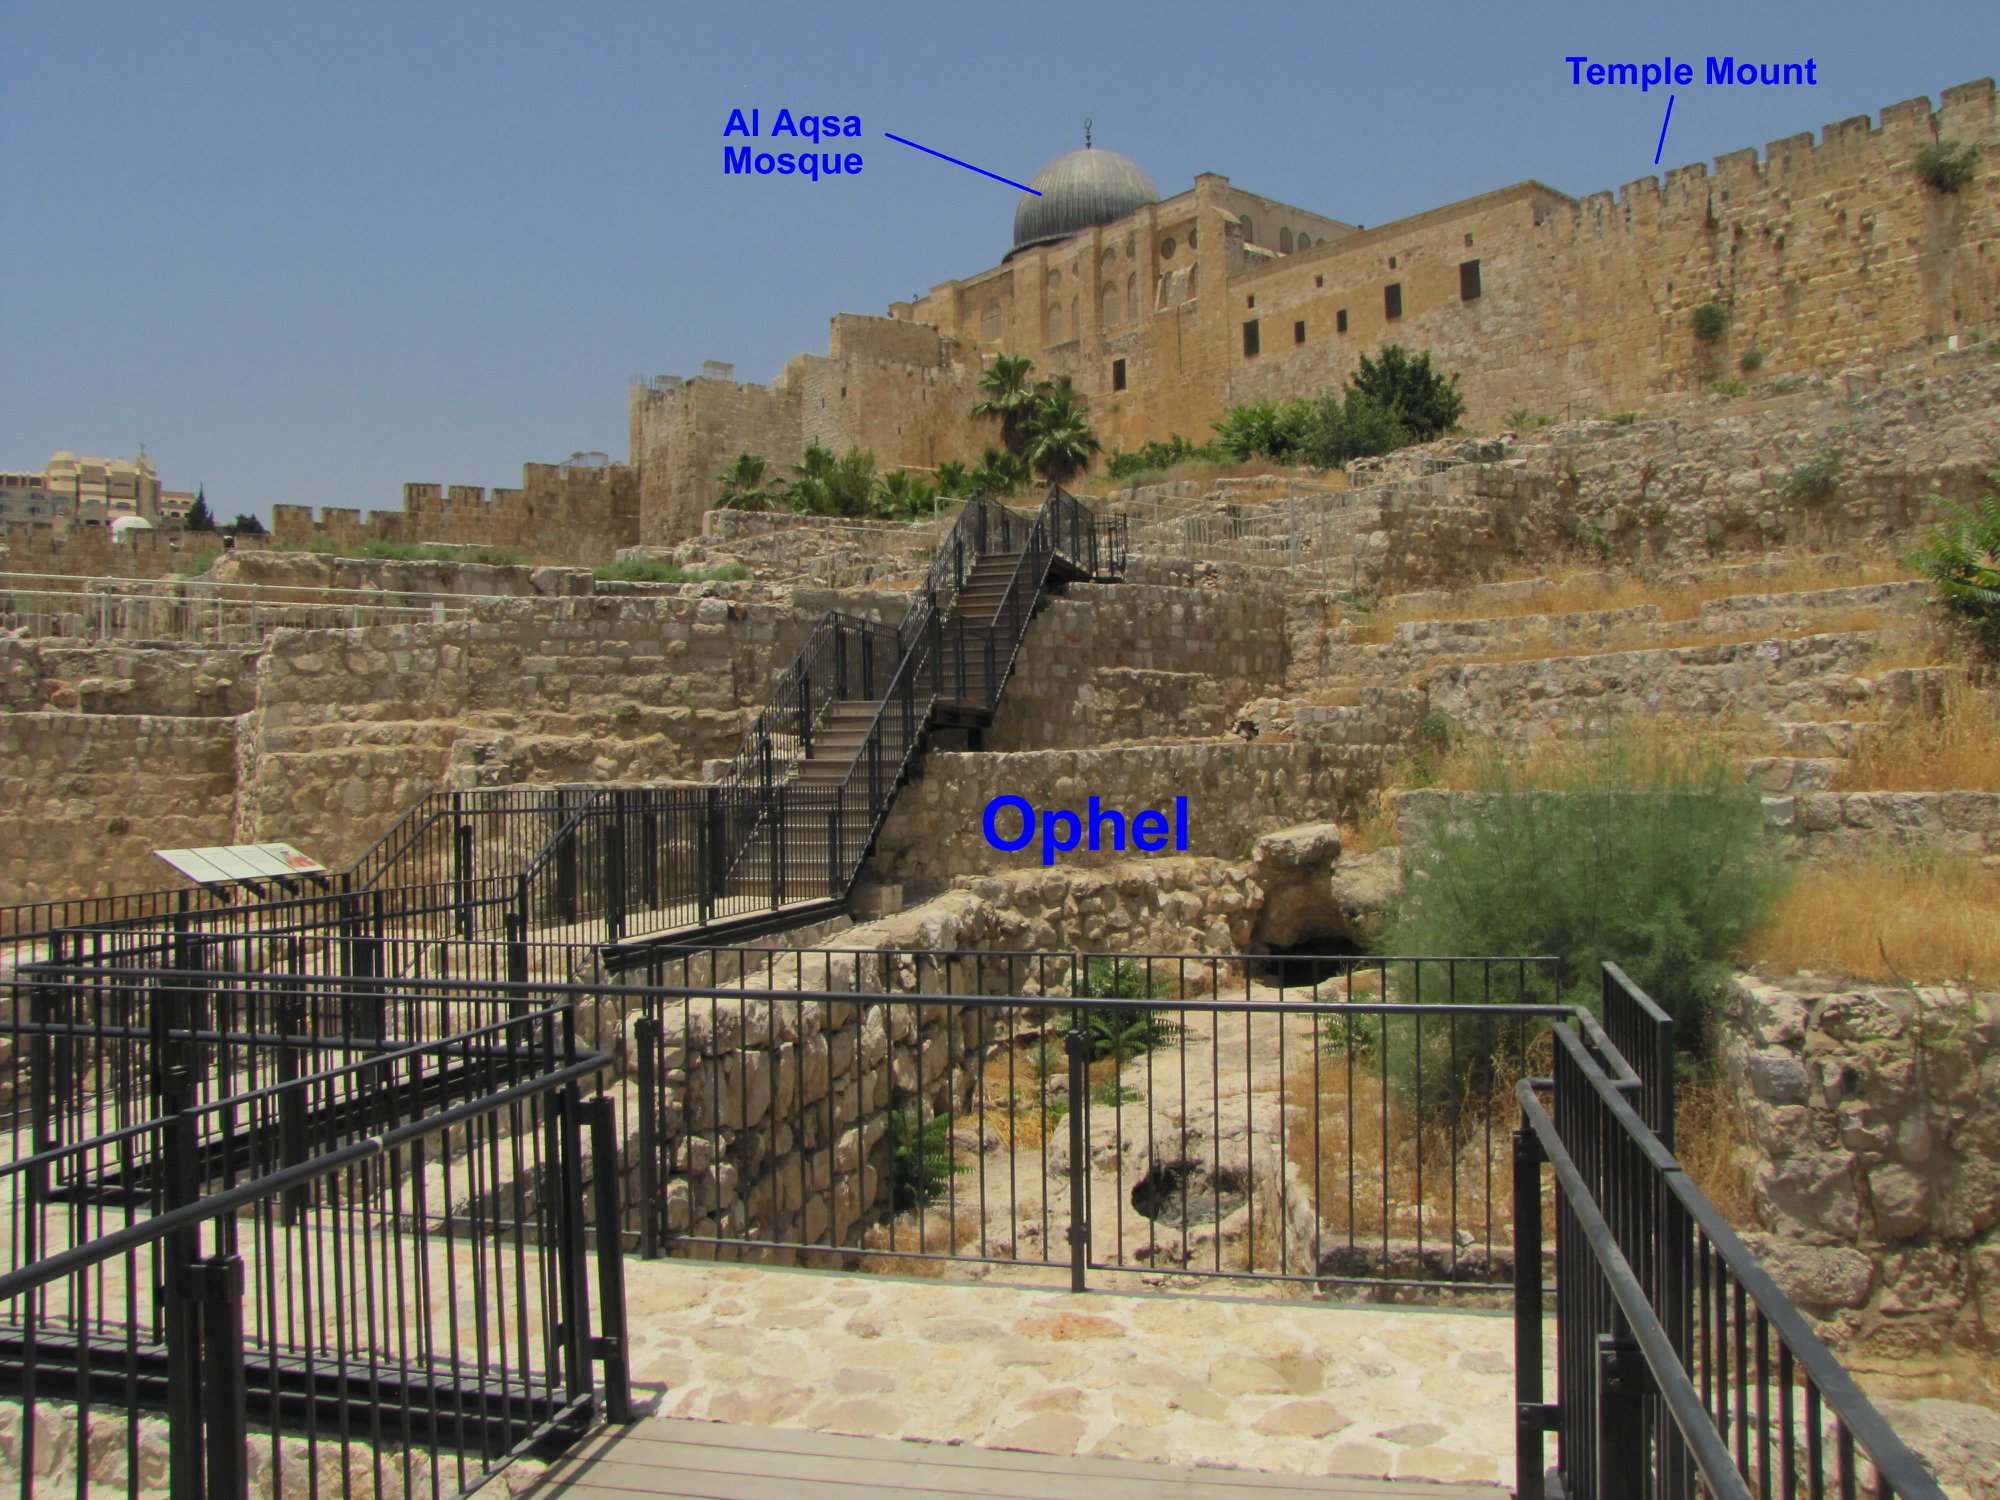 Ophel, Solomon's Wall, 950 BC four chamber gate system, Royal structure, straight wall